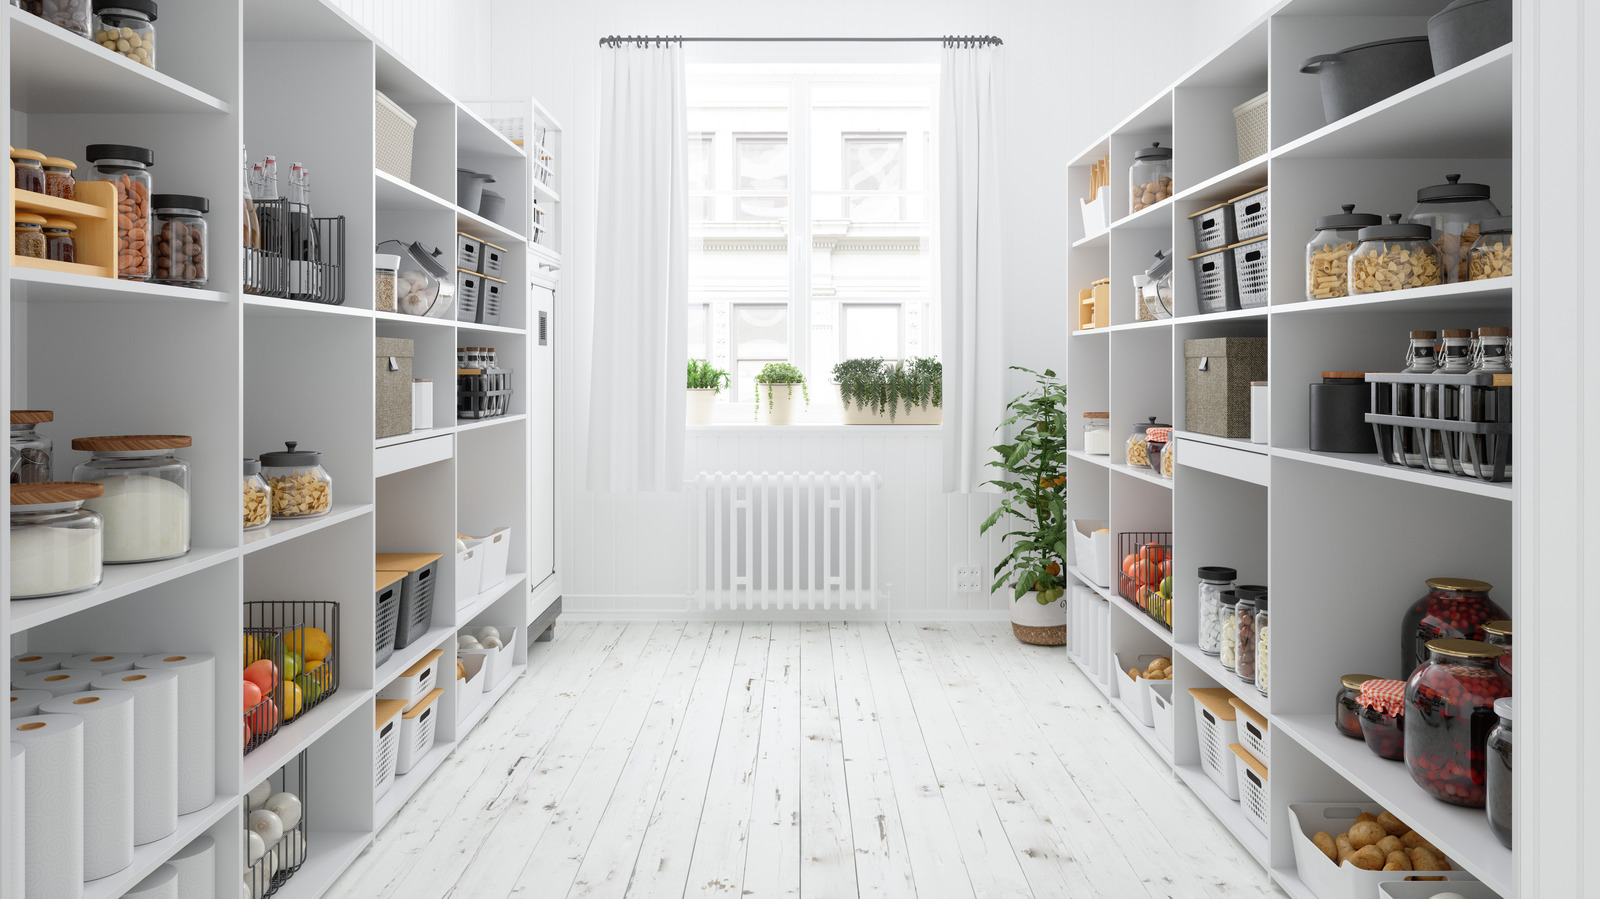 3 Clever Ideas For Building A Pantry For Extra Kitchen Storage